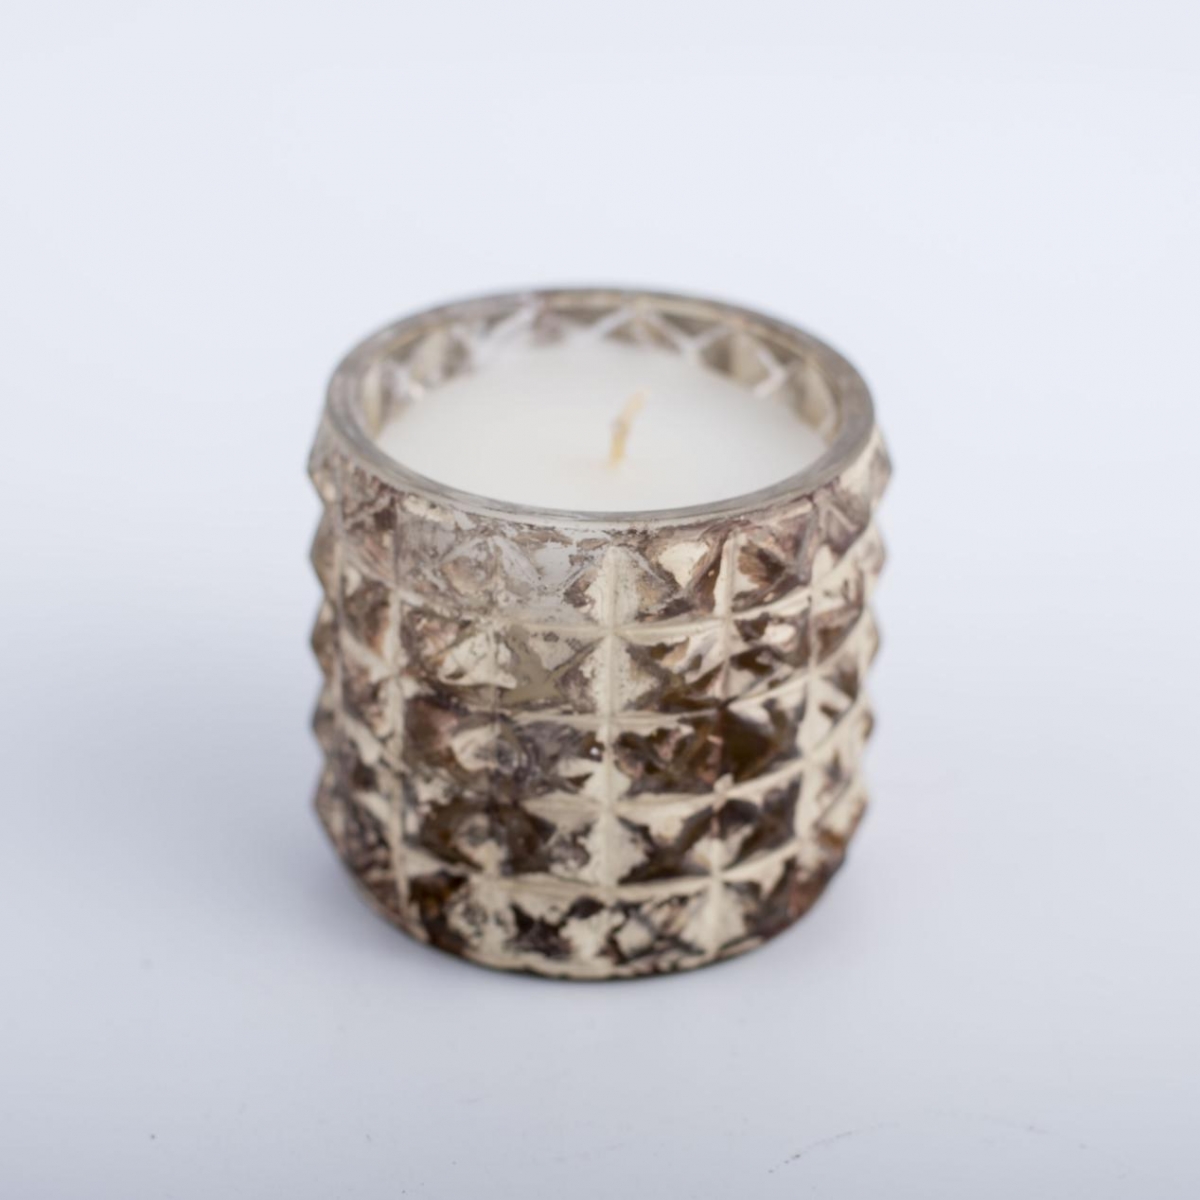 Aromatherapy Candles – Natural Essential Oil ,Soy Wax ,Scented Candles ,Retro Style Glass Jar ,Relax ,China Factory ,Price-HOWCANDLE-Candles,Scented Candles,Aromatherapy Candles,Soy Candles,Vegan Candles,Jar Candles,Pillar Candles,Candle Gift Sets,Essential Oils,Reed Diffuser,Candle Holder,